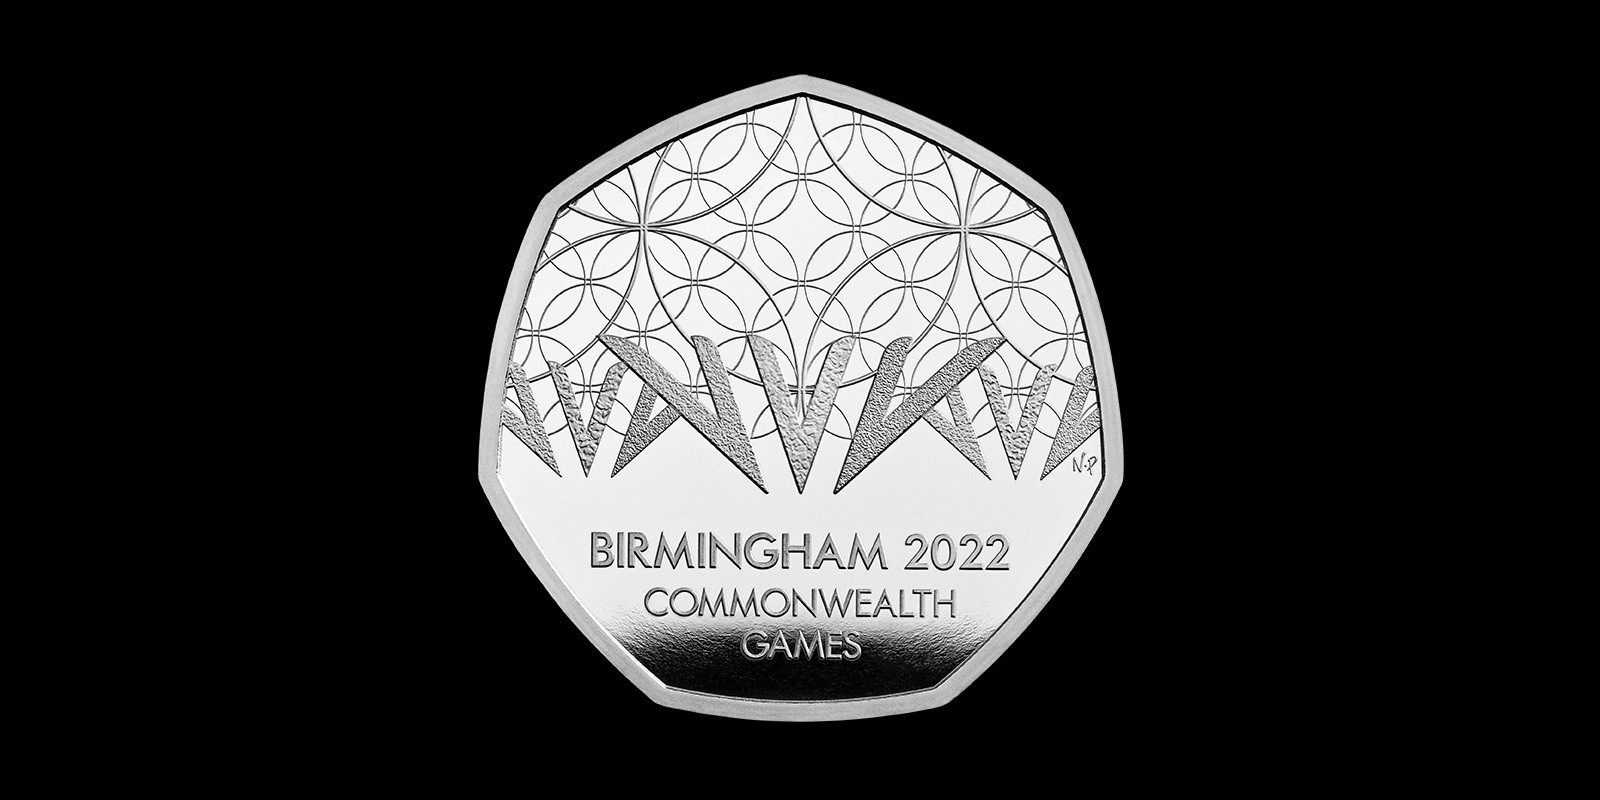 A special 50-pence piece has been created to mark the Commonwealth Games in Birmingham ©Royal Mint